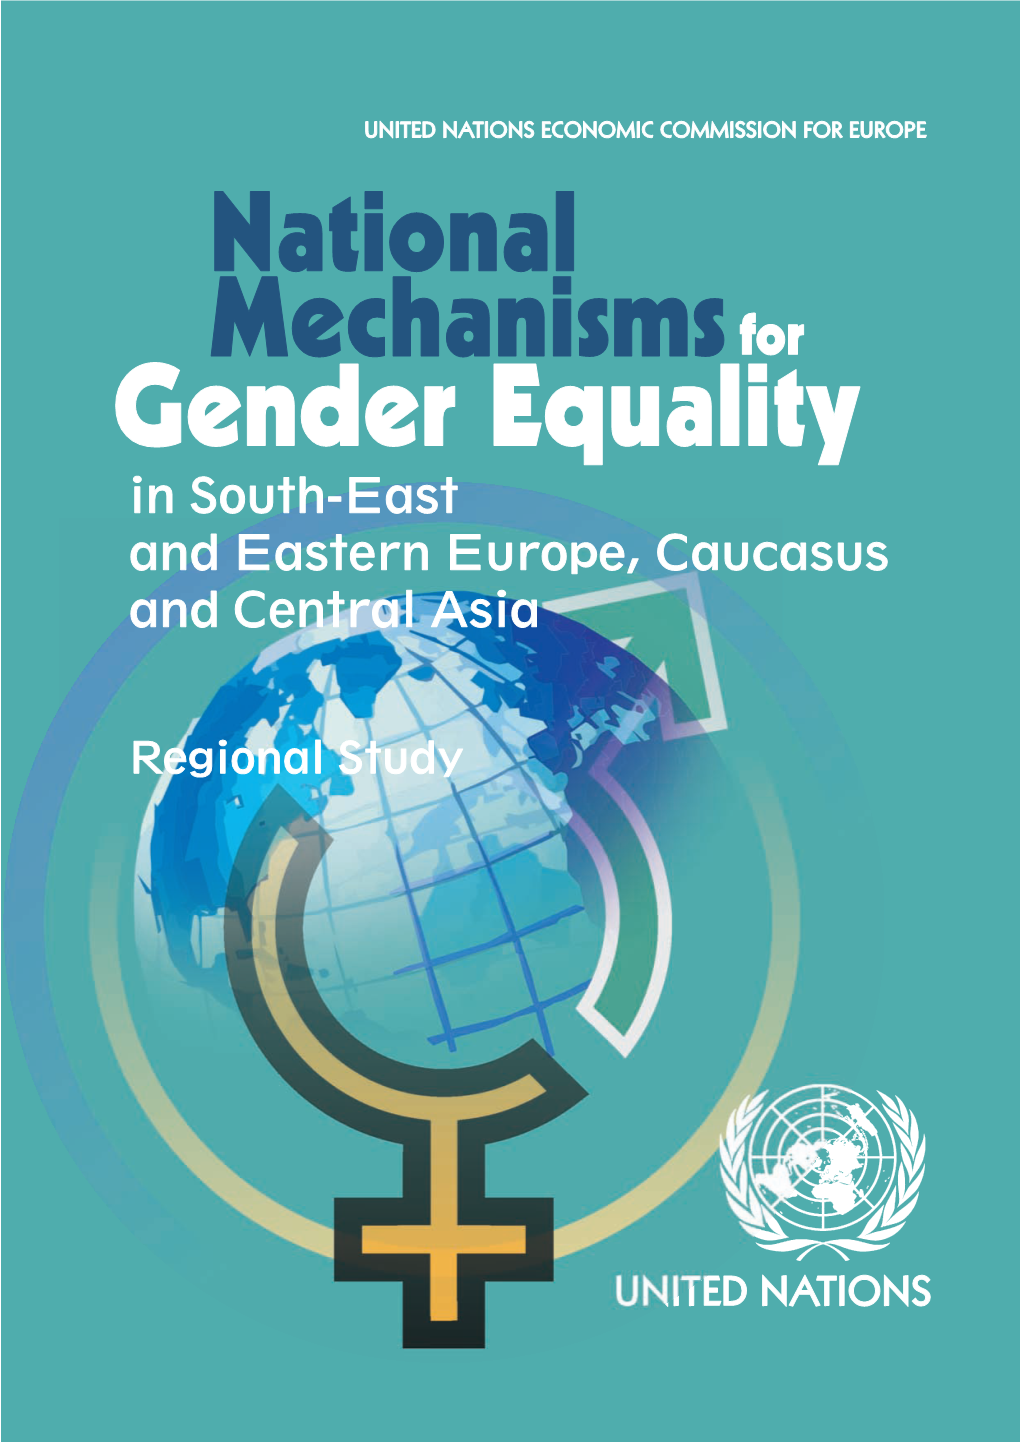 Gender Equality in South-East and Eastern Europe, Caucasus and Central Asia